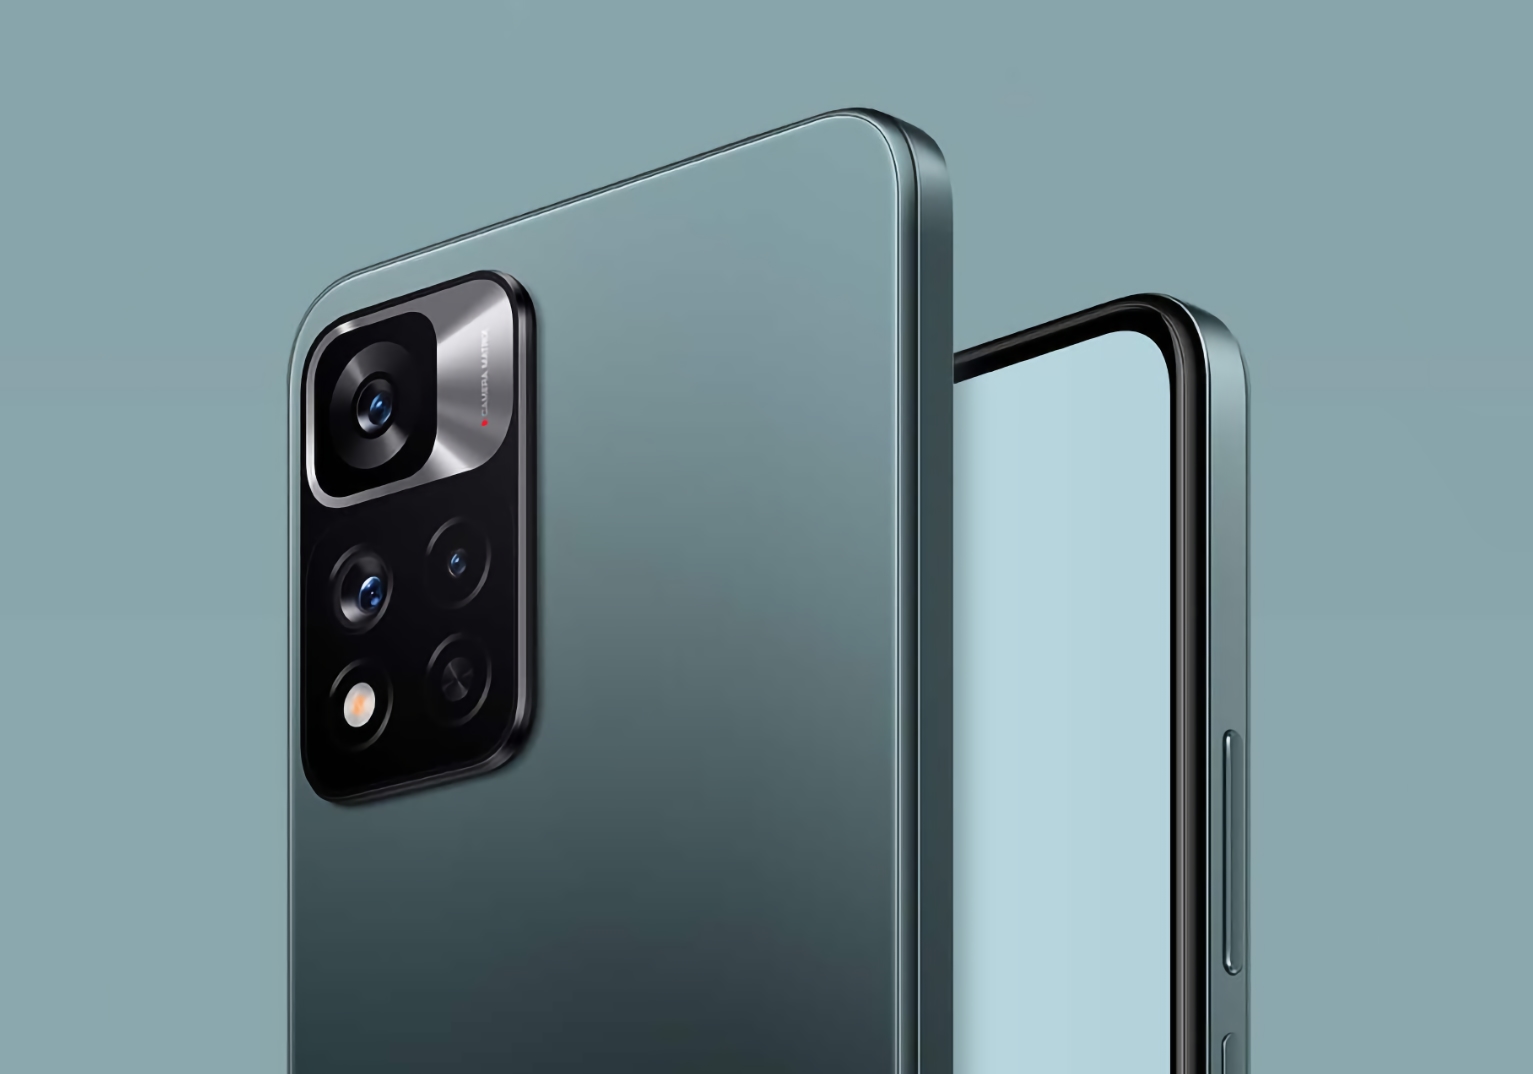 50 MP camera, microSD slot and MIUI 12.5 out of the box: the specifications of the global version of Redmi Note 11 appeared on the network